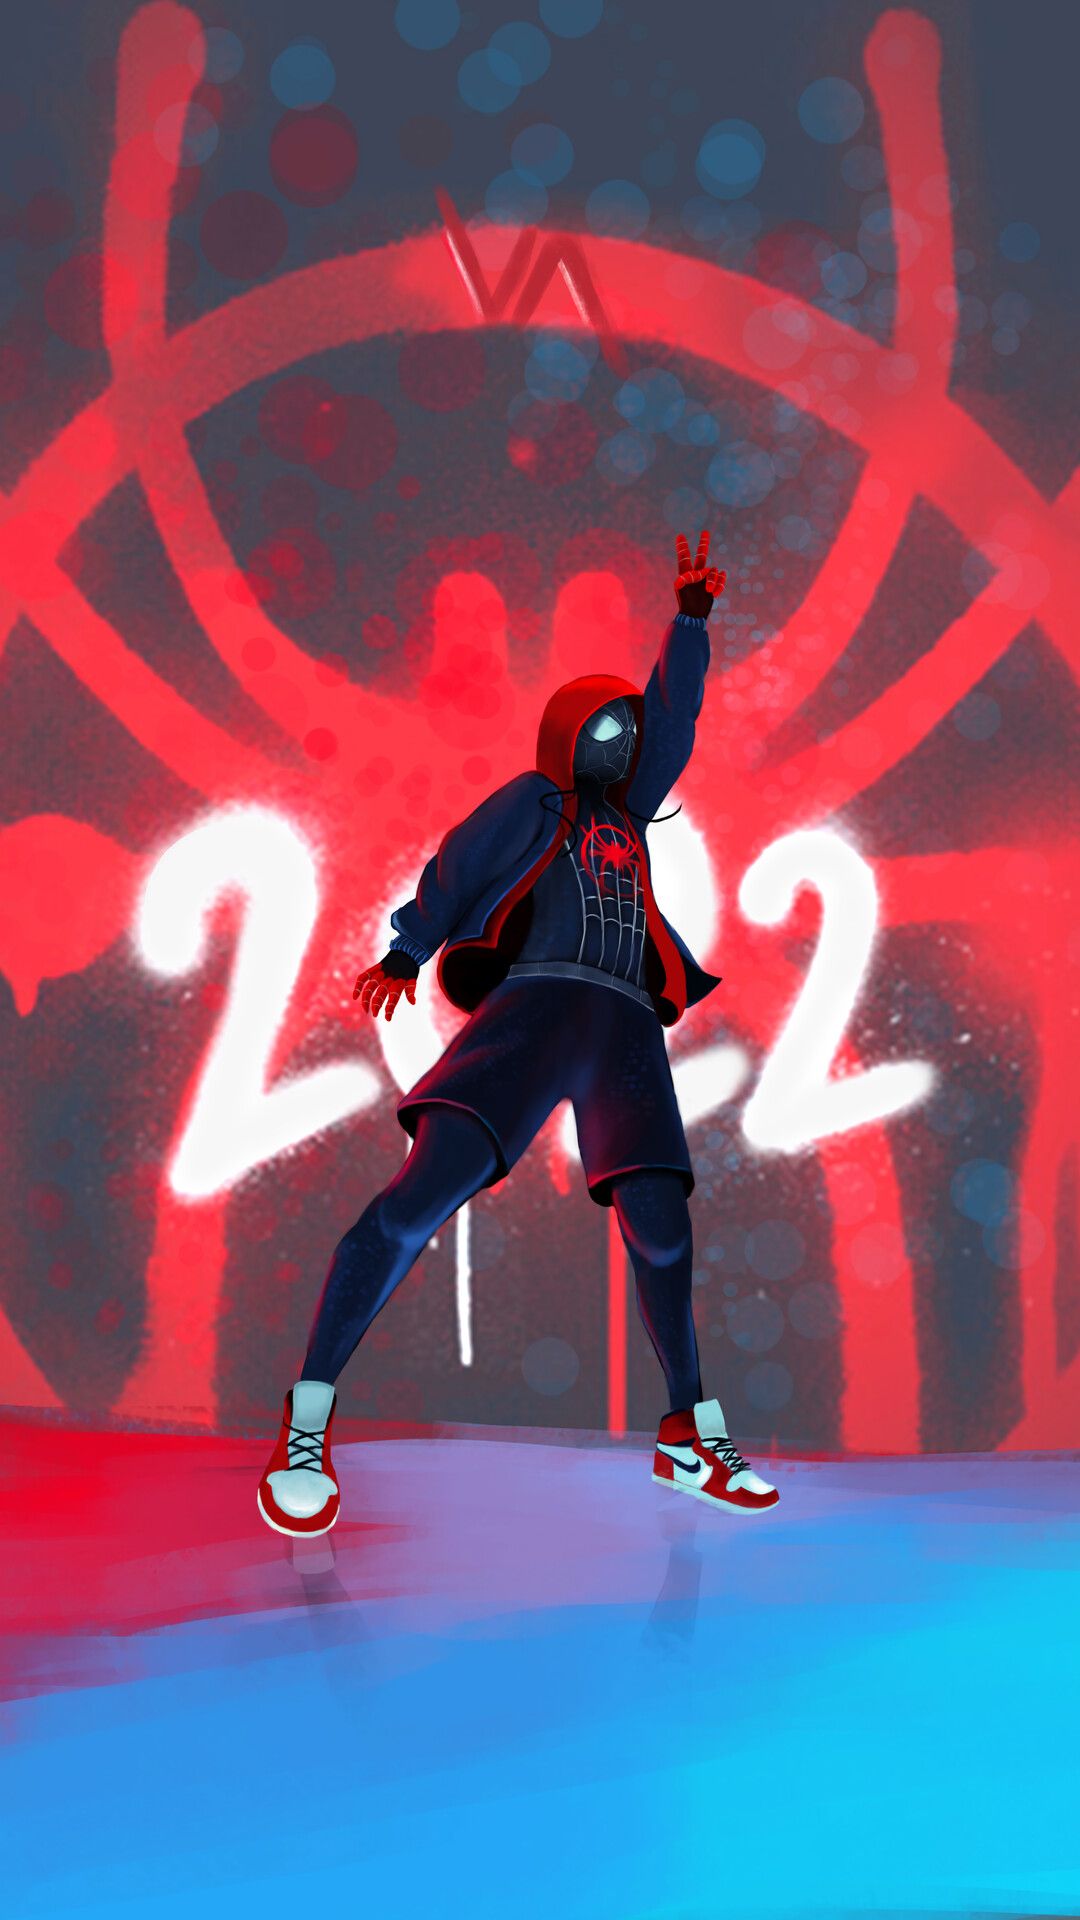 Spider-Man Across The Spider-Verse 2022 Wallpapers